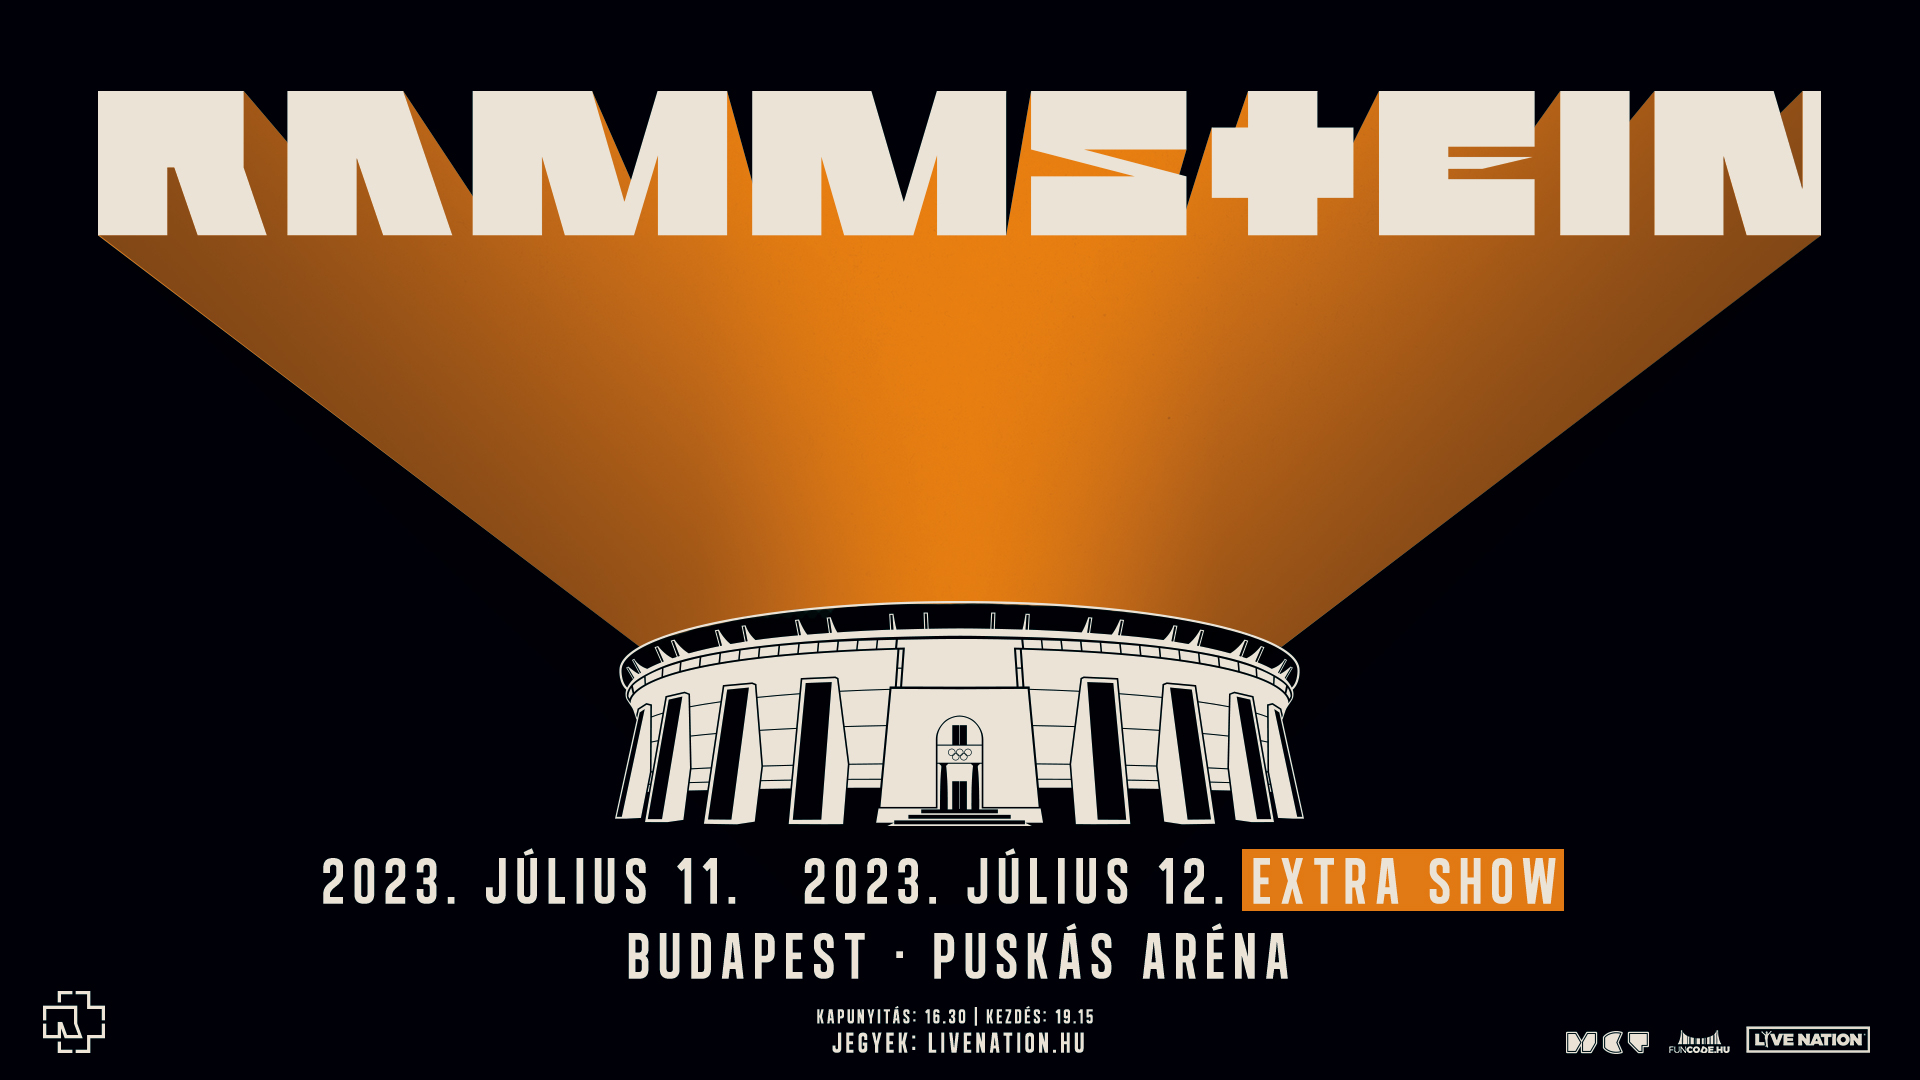 Rammstein concert - 12th of July, 2023! EXTRA SHOW!